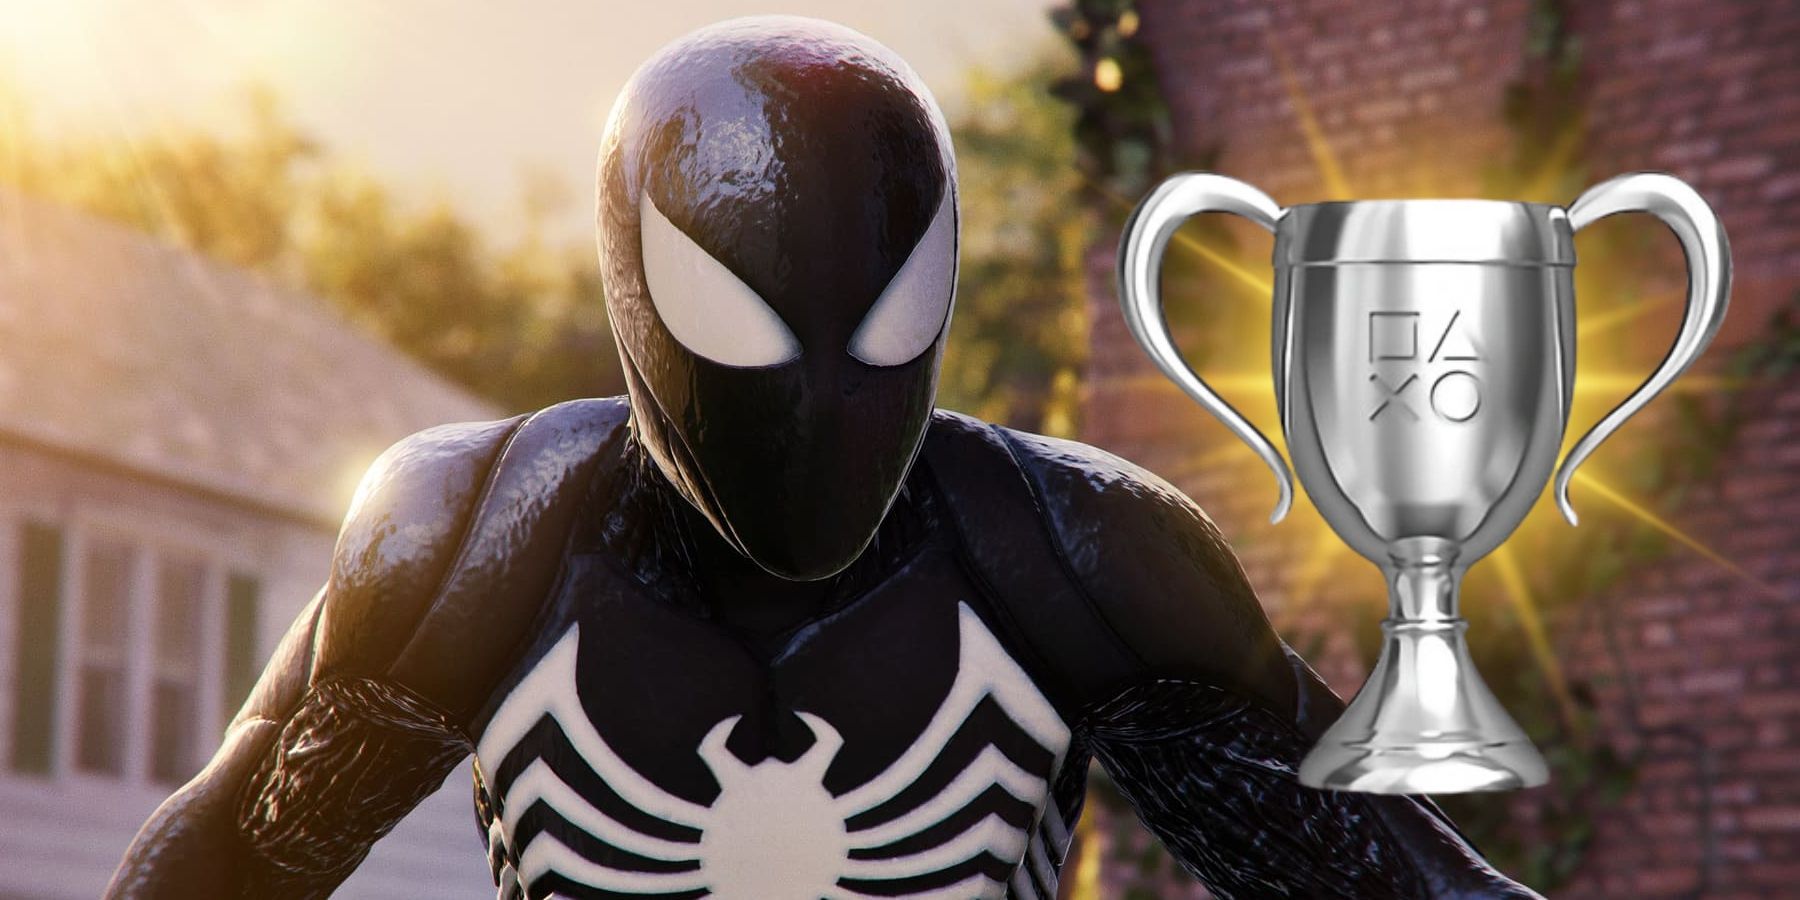 Spider-Man wears his black Symbiote suit while a render of a silver PlayStation trophy sits on the right. A golden glow shines behind the trophy.